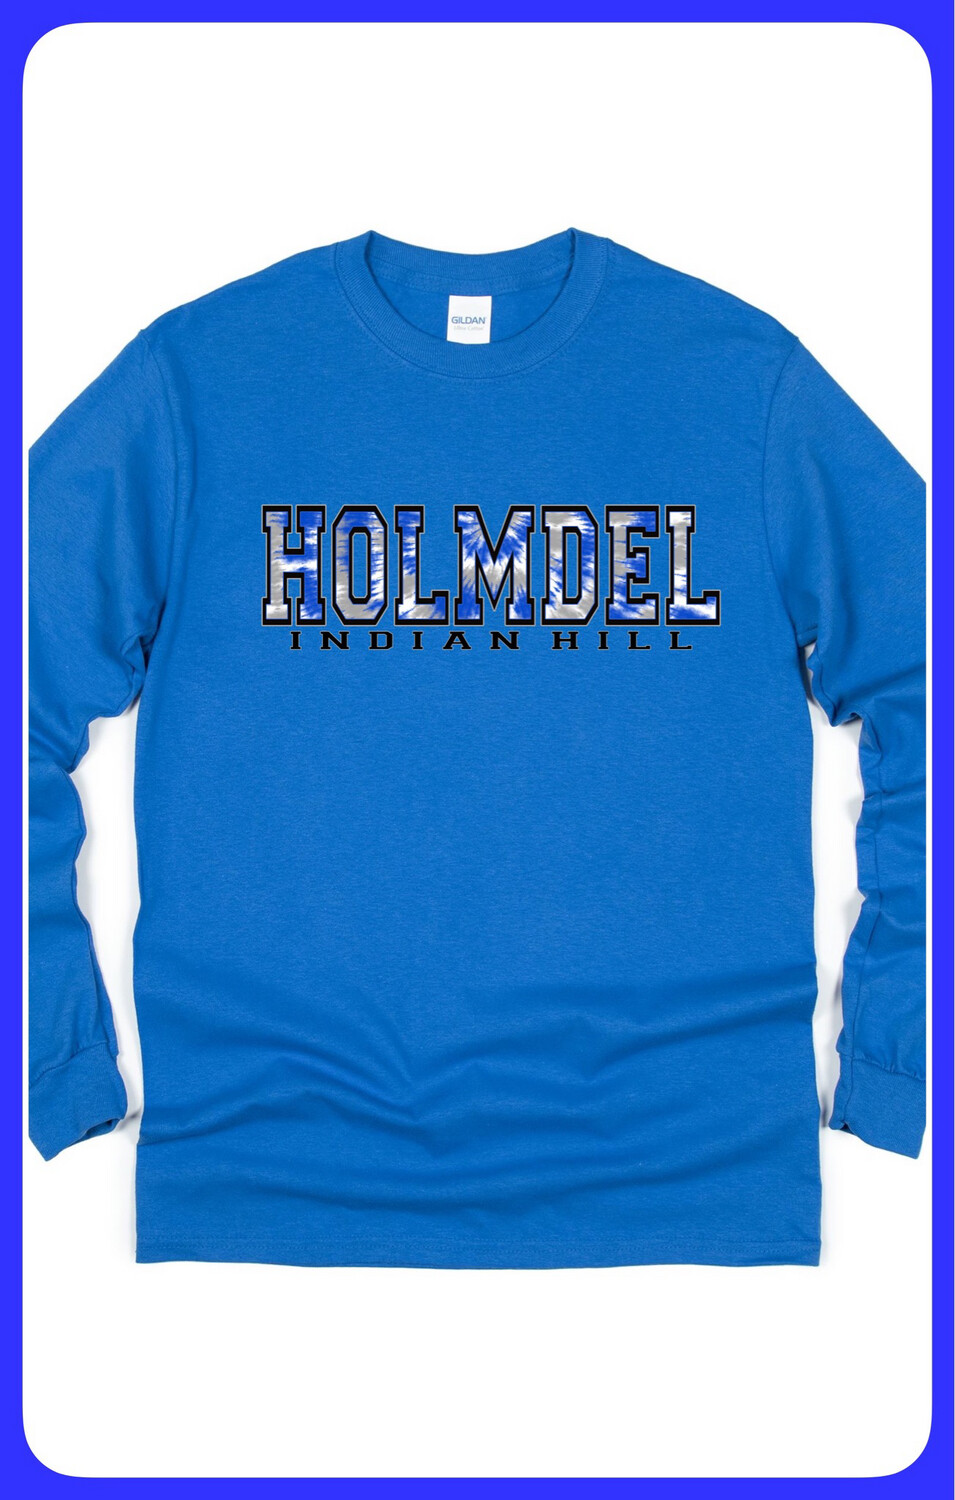 Heathered Royal Blue Holmdel Indian Hill youth & Adult long sleeve T